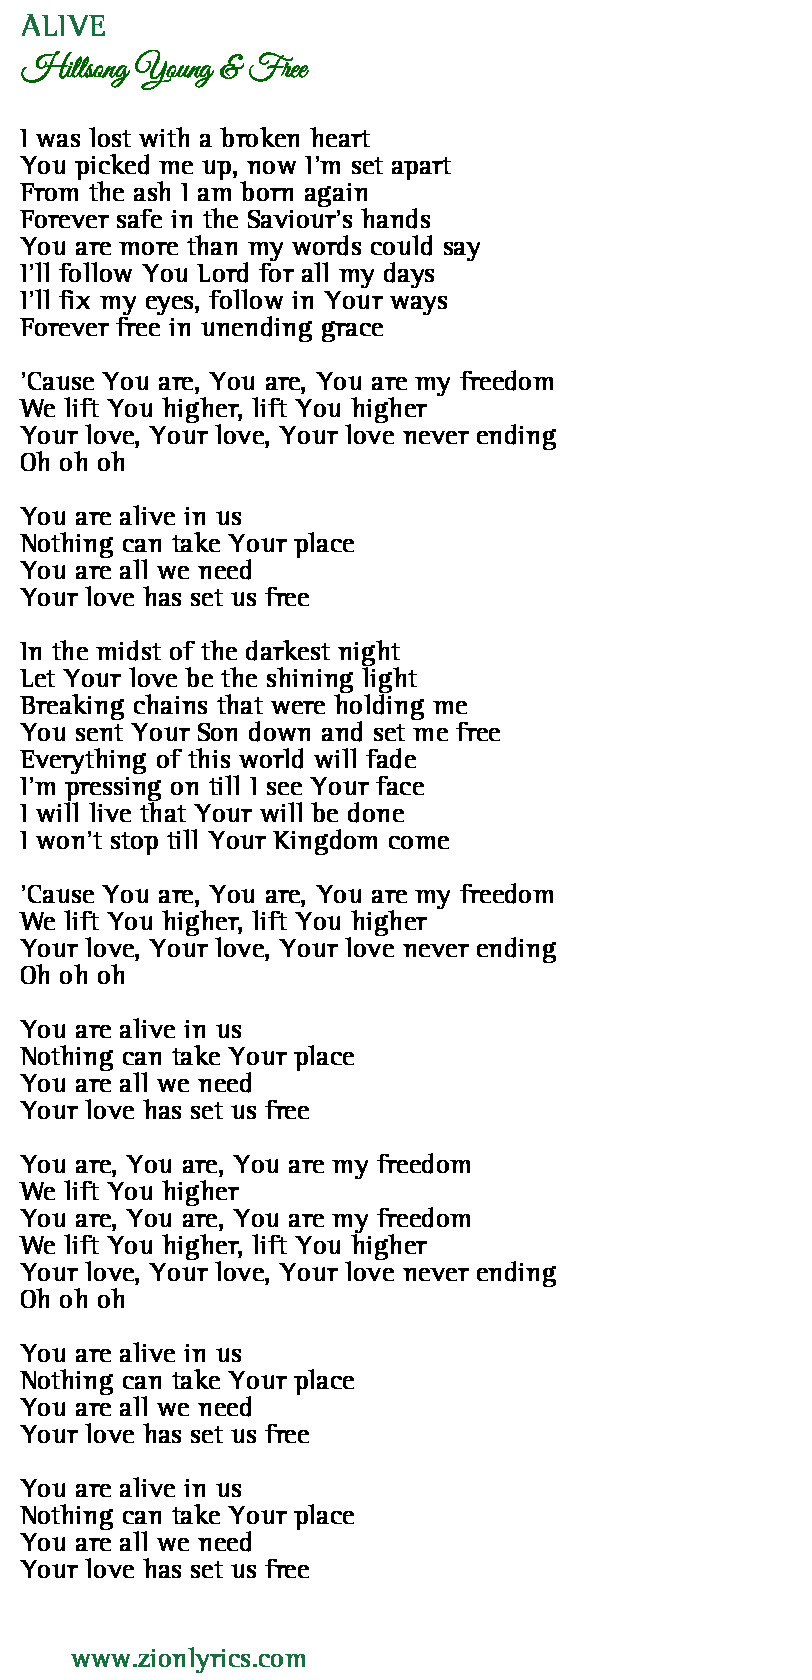 Hillsong Young And Free - Alive Lyrics